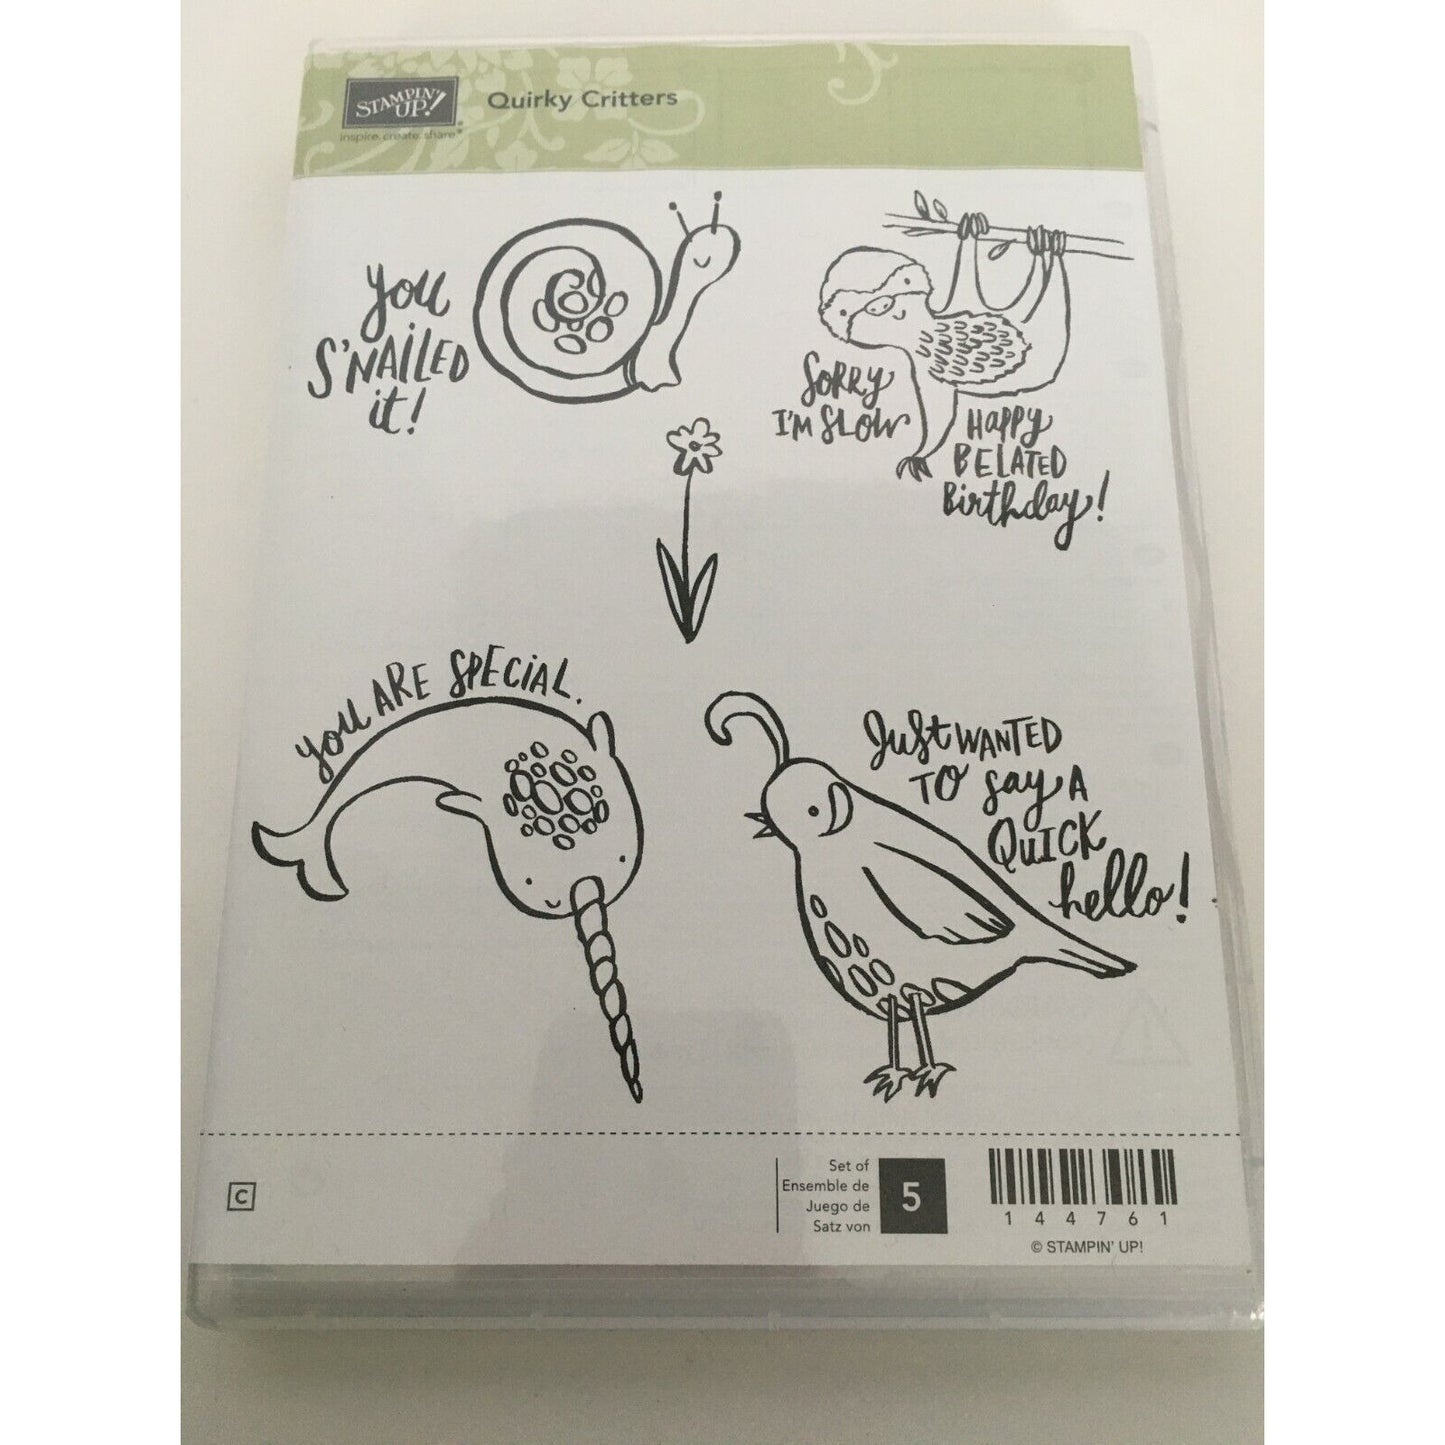 Stampin' Up Quirky Critters Rubber Stamps Animals Snail Pun Sloth Quail Flower 5